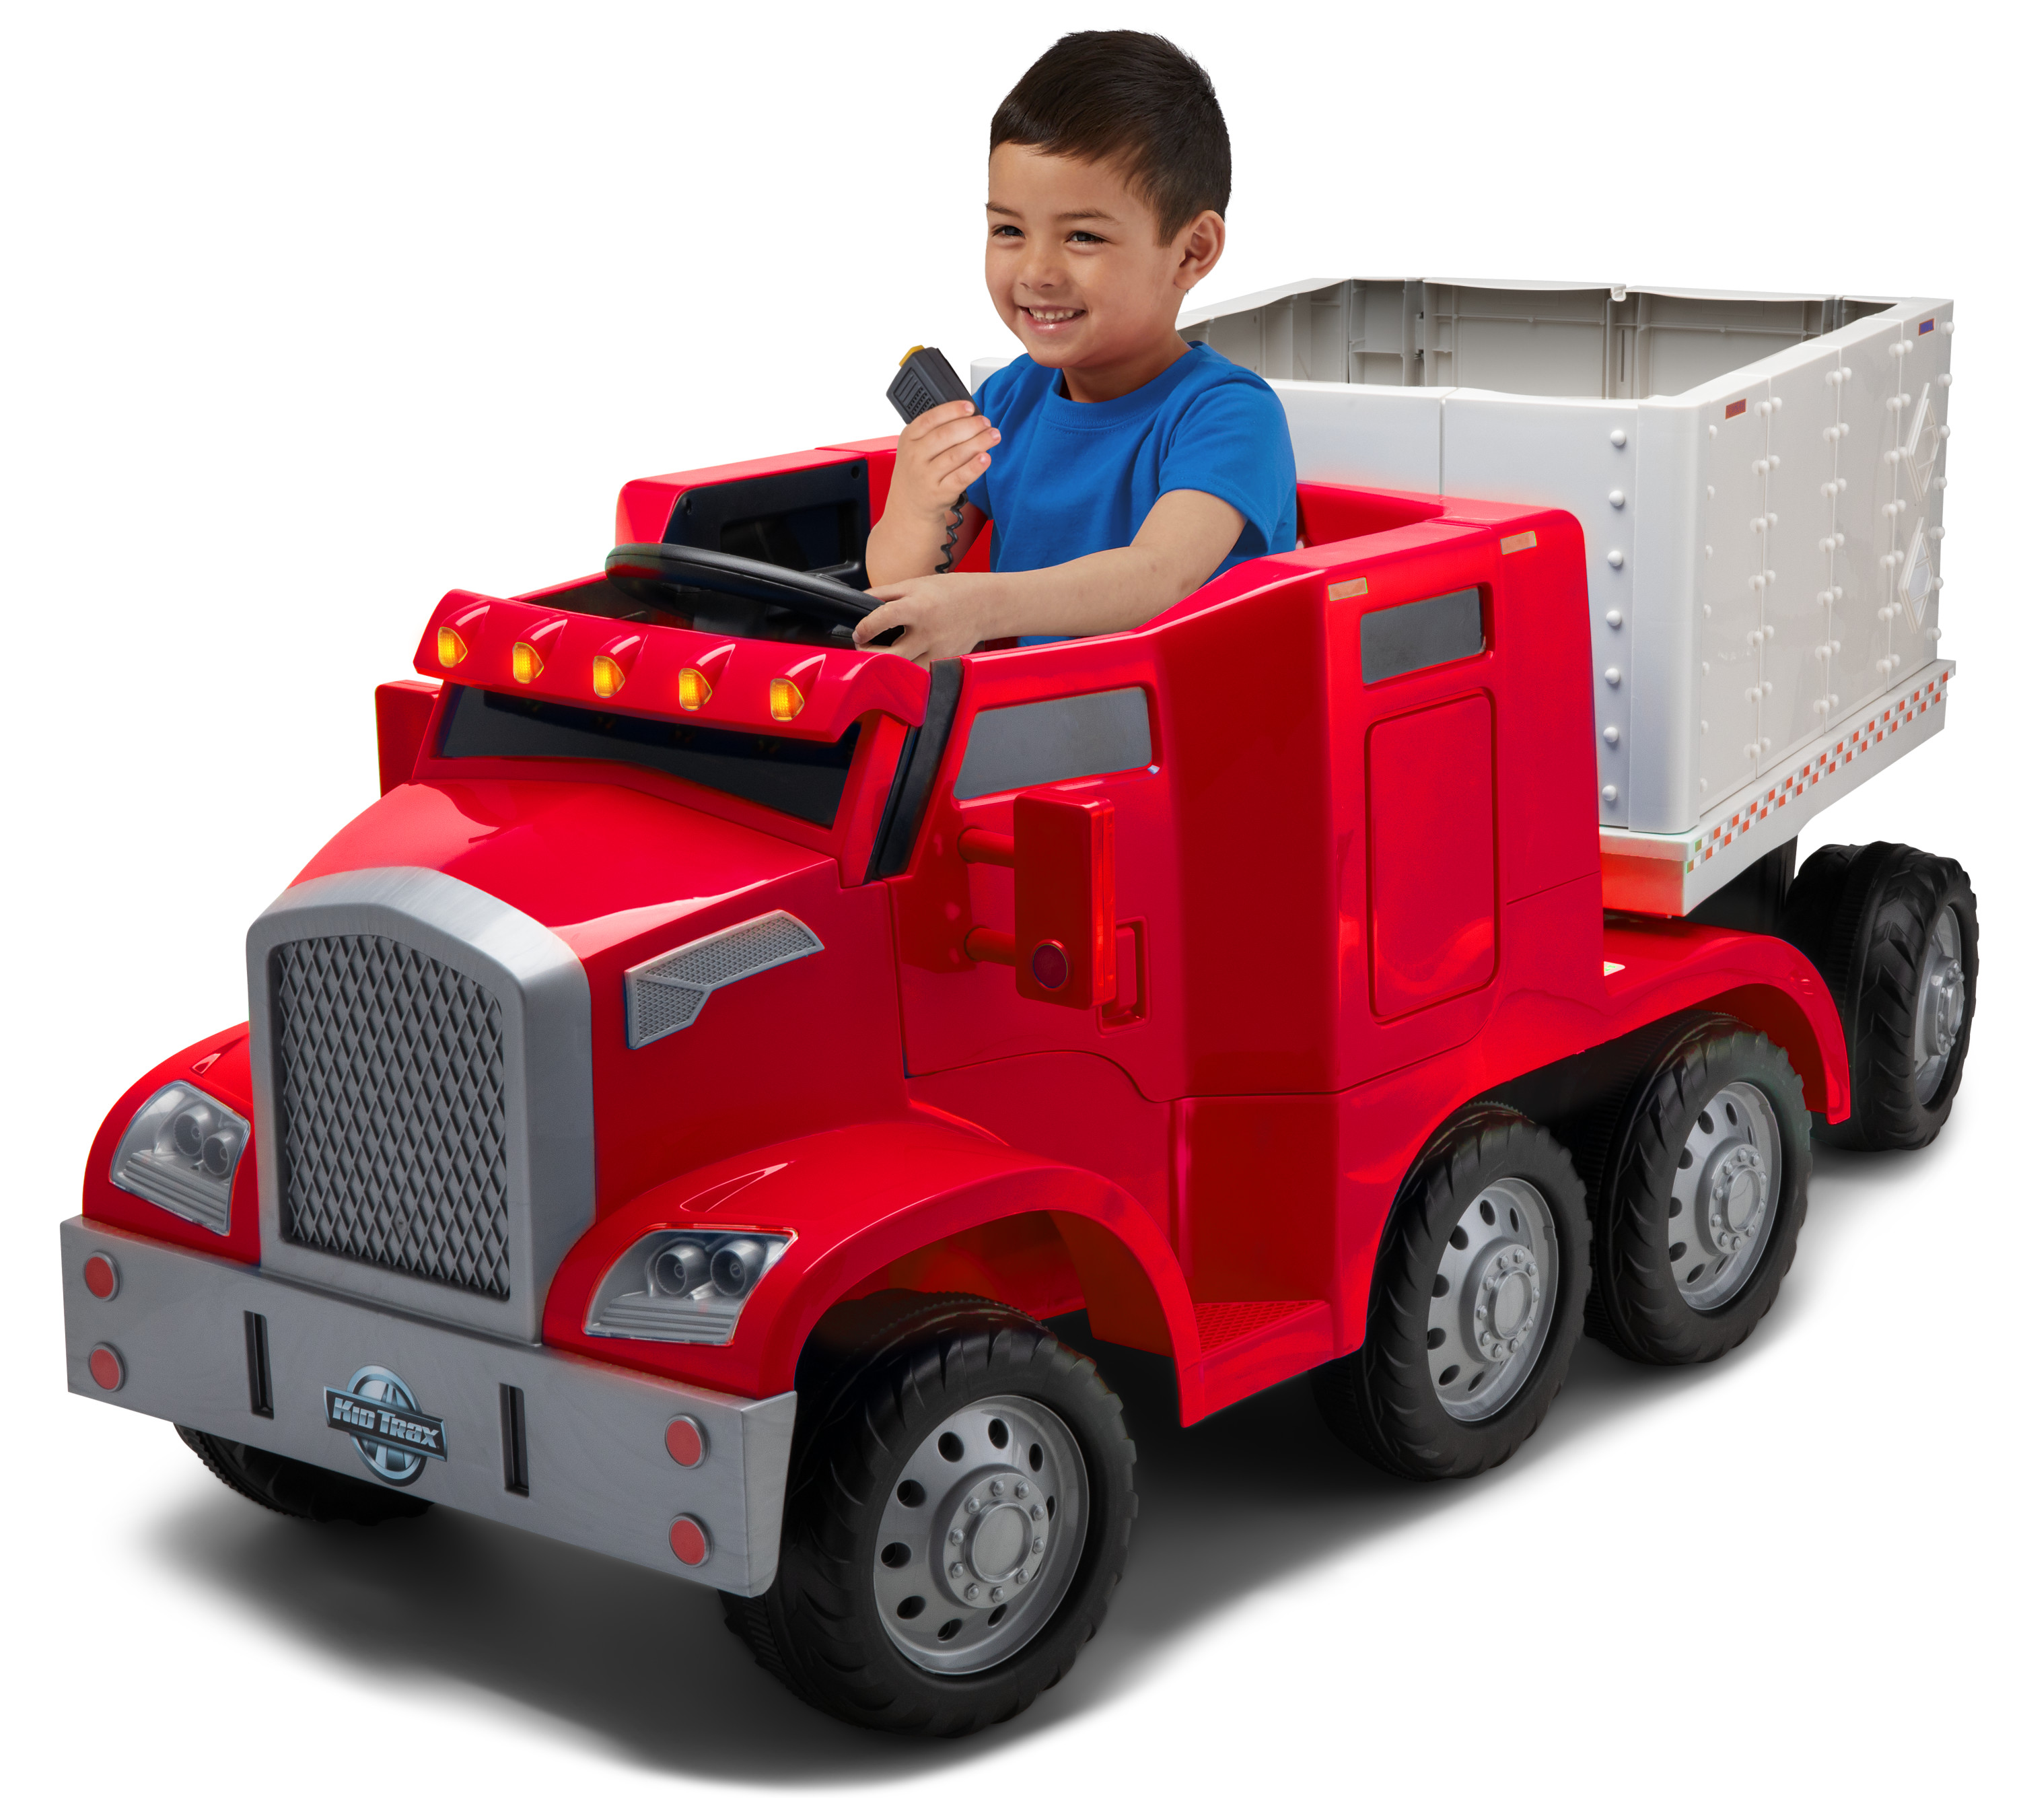 Semi-Truck and Trailer Ride-On Toy by Kid Trax Red, Rig - image 1 of 8